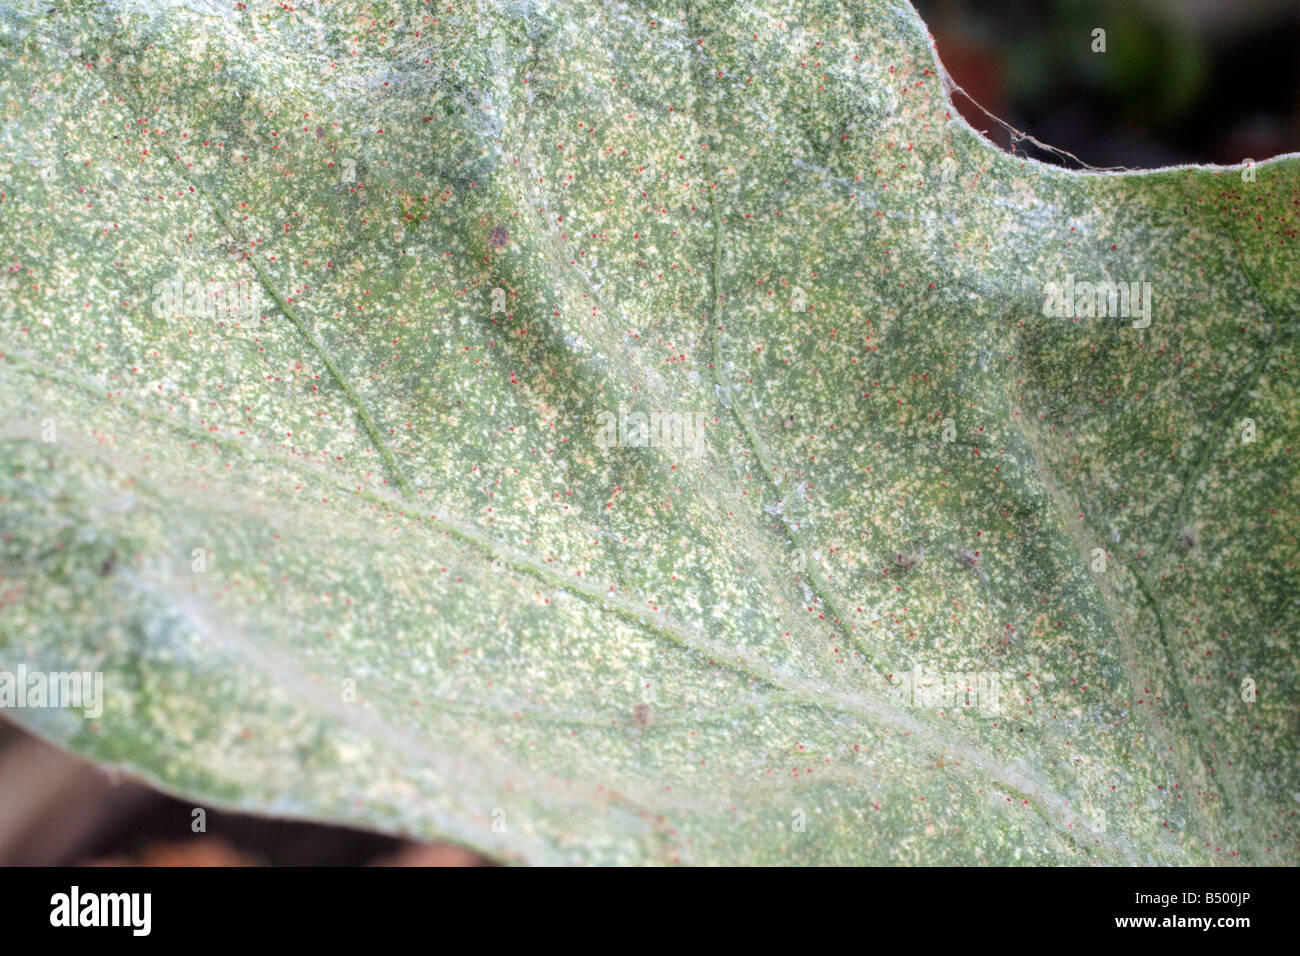 AUBERGINE LEAF SHOWING SEVERE SIGNS OF RED SPIDER INFESTATION TETRANYCHUS URTICAE Stock Photo